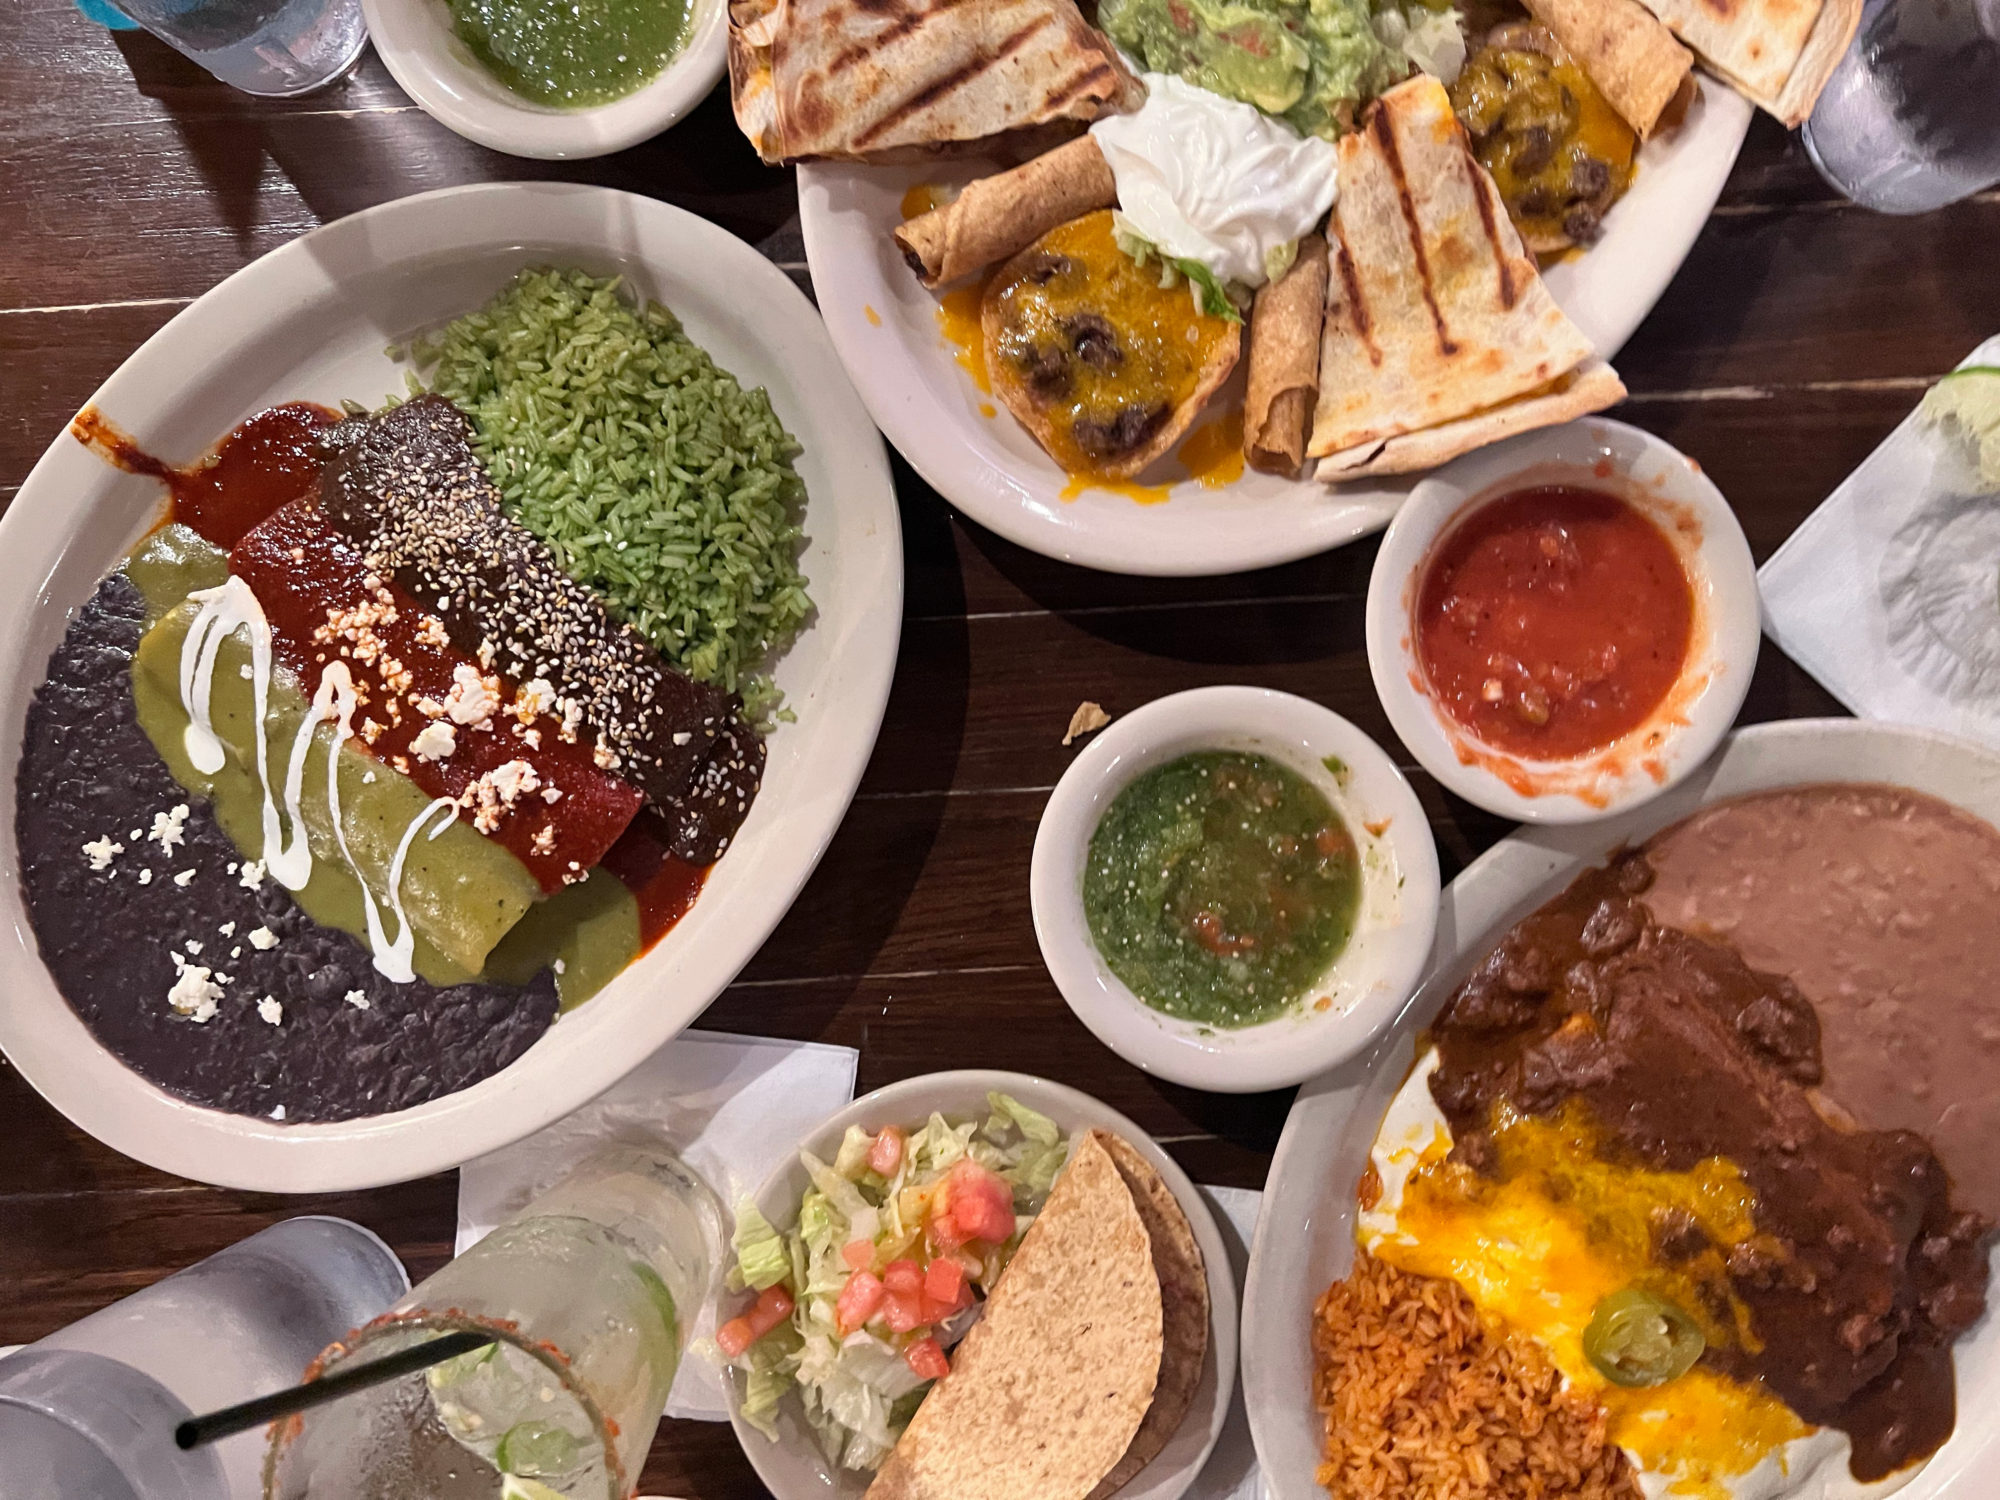 Plates full of Tex-Mex on a restaurant table